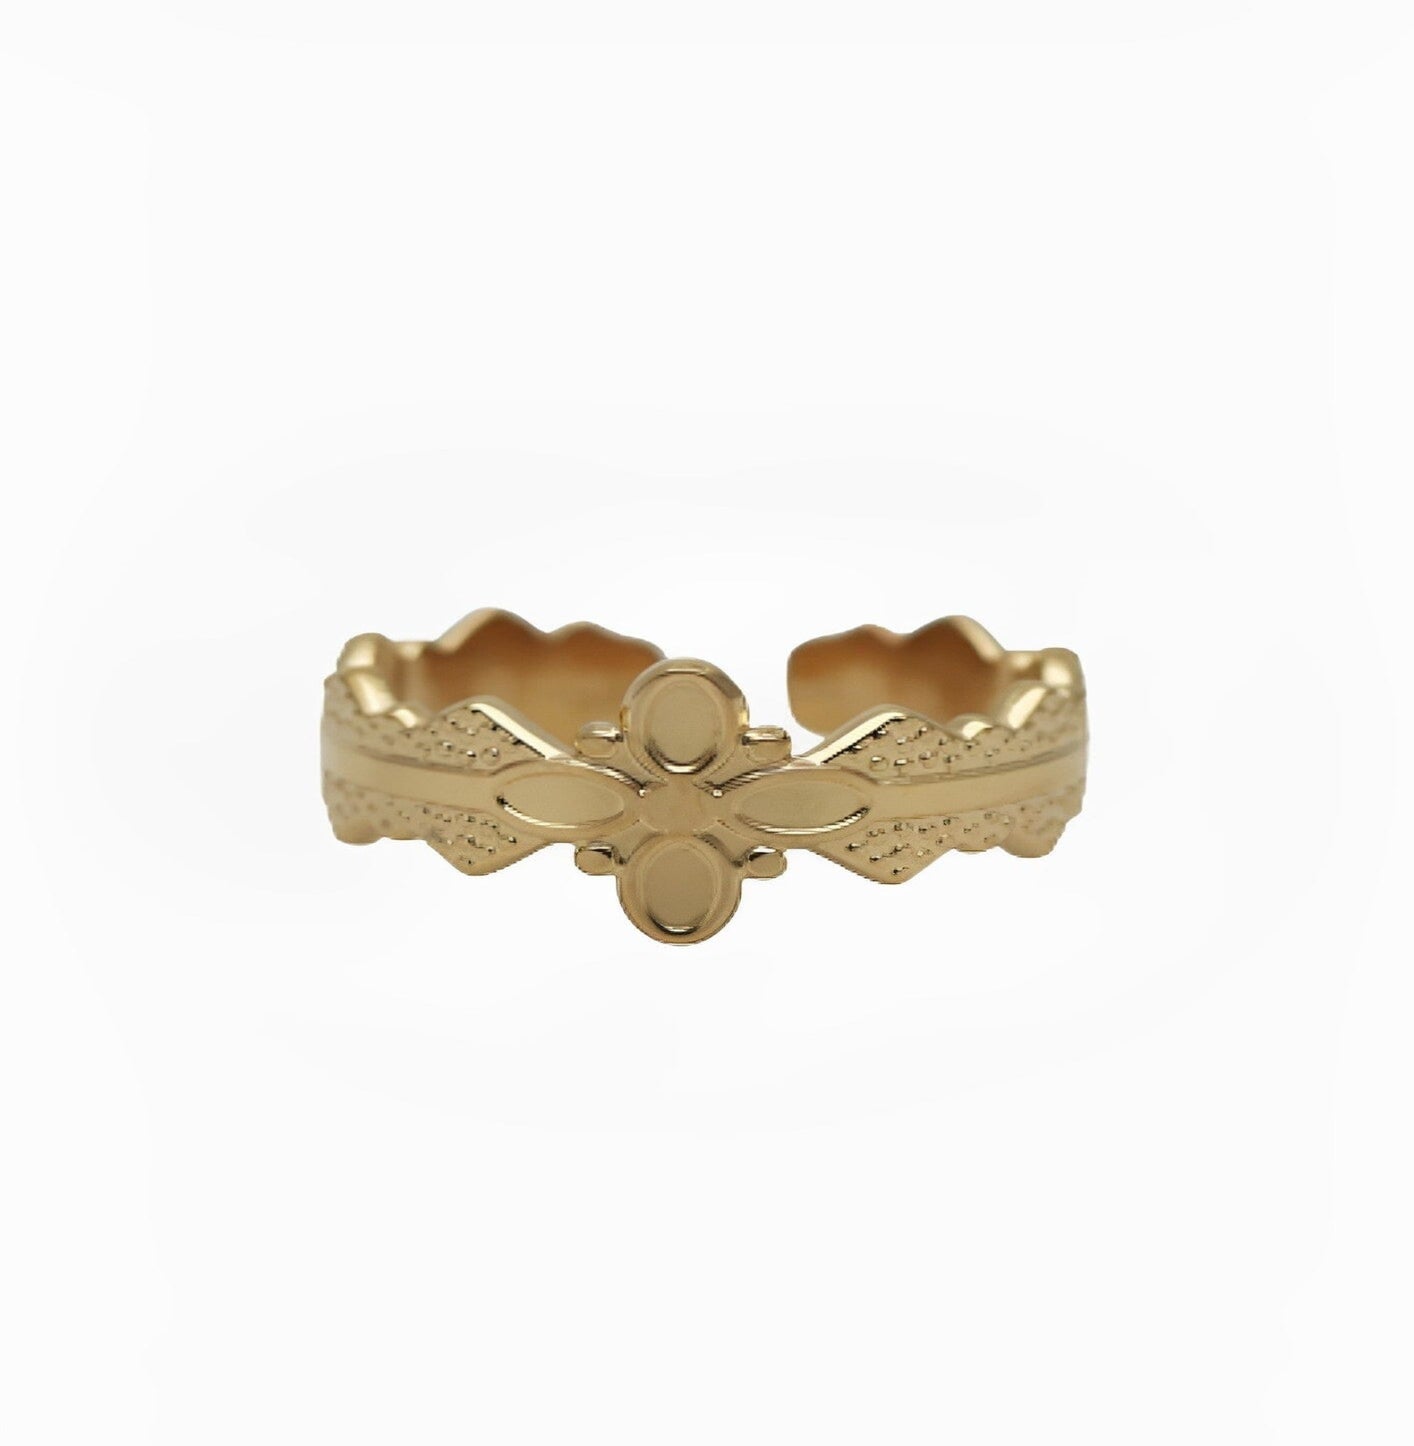 FLOWER ROYAL RING earing Yubama Jewelry Online Store - The Elegant Designs of Gold and Silver ! 